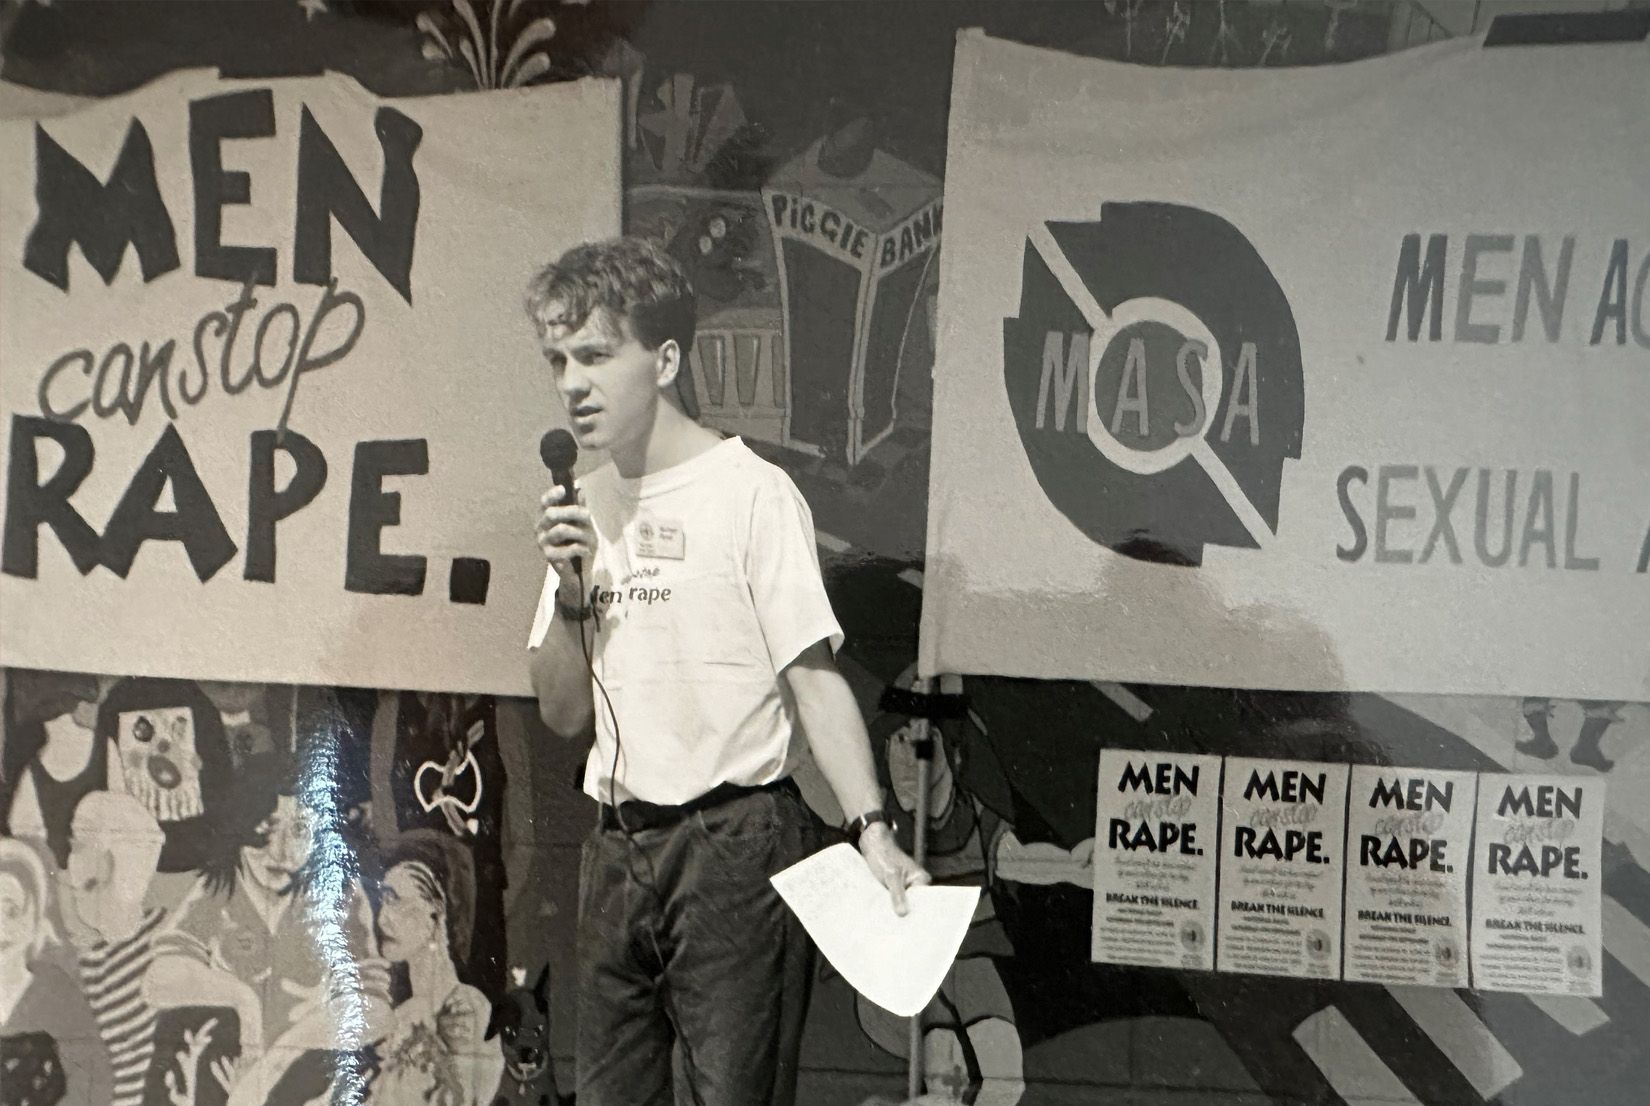 Michael Flood speaking at the Men Against Sexual Assault rally in Garema Place, Canberra, 1992